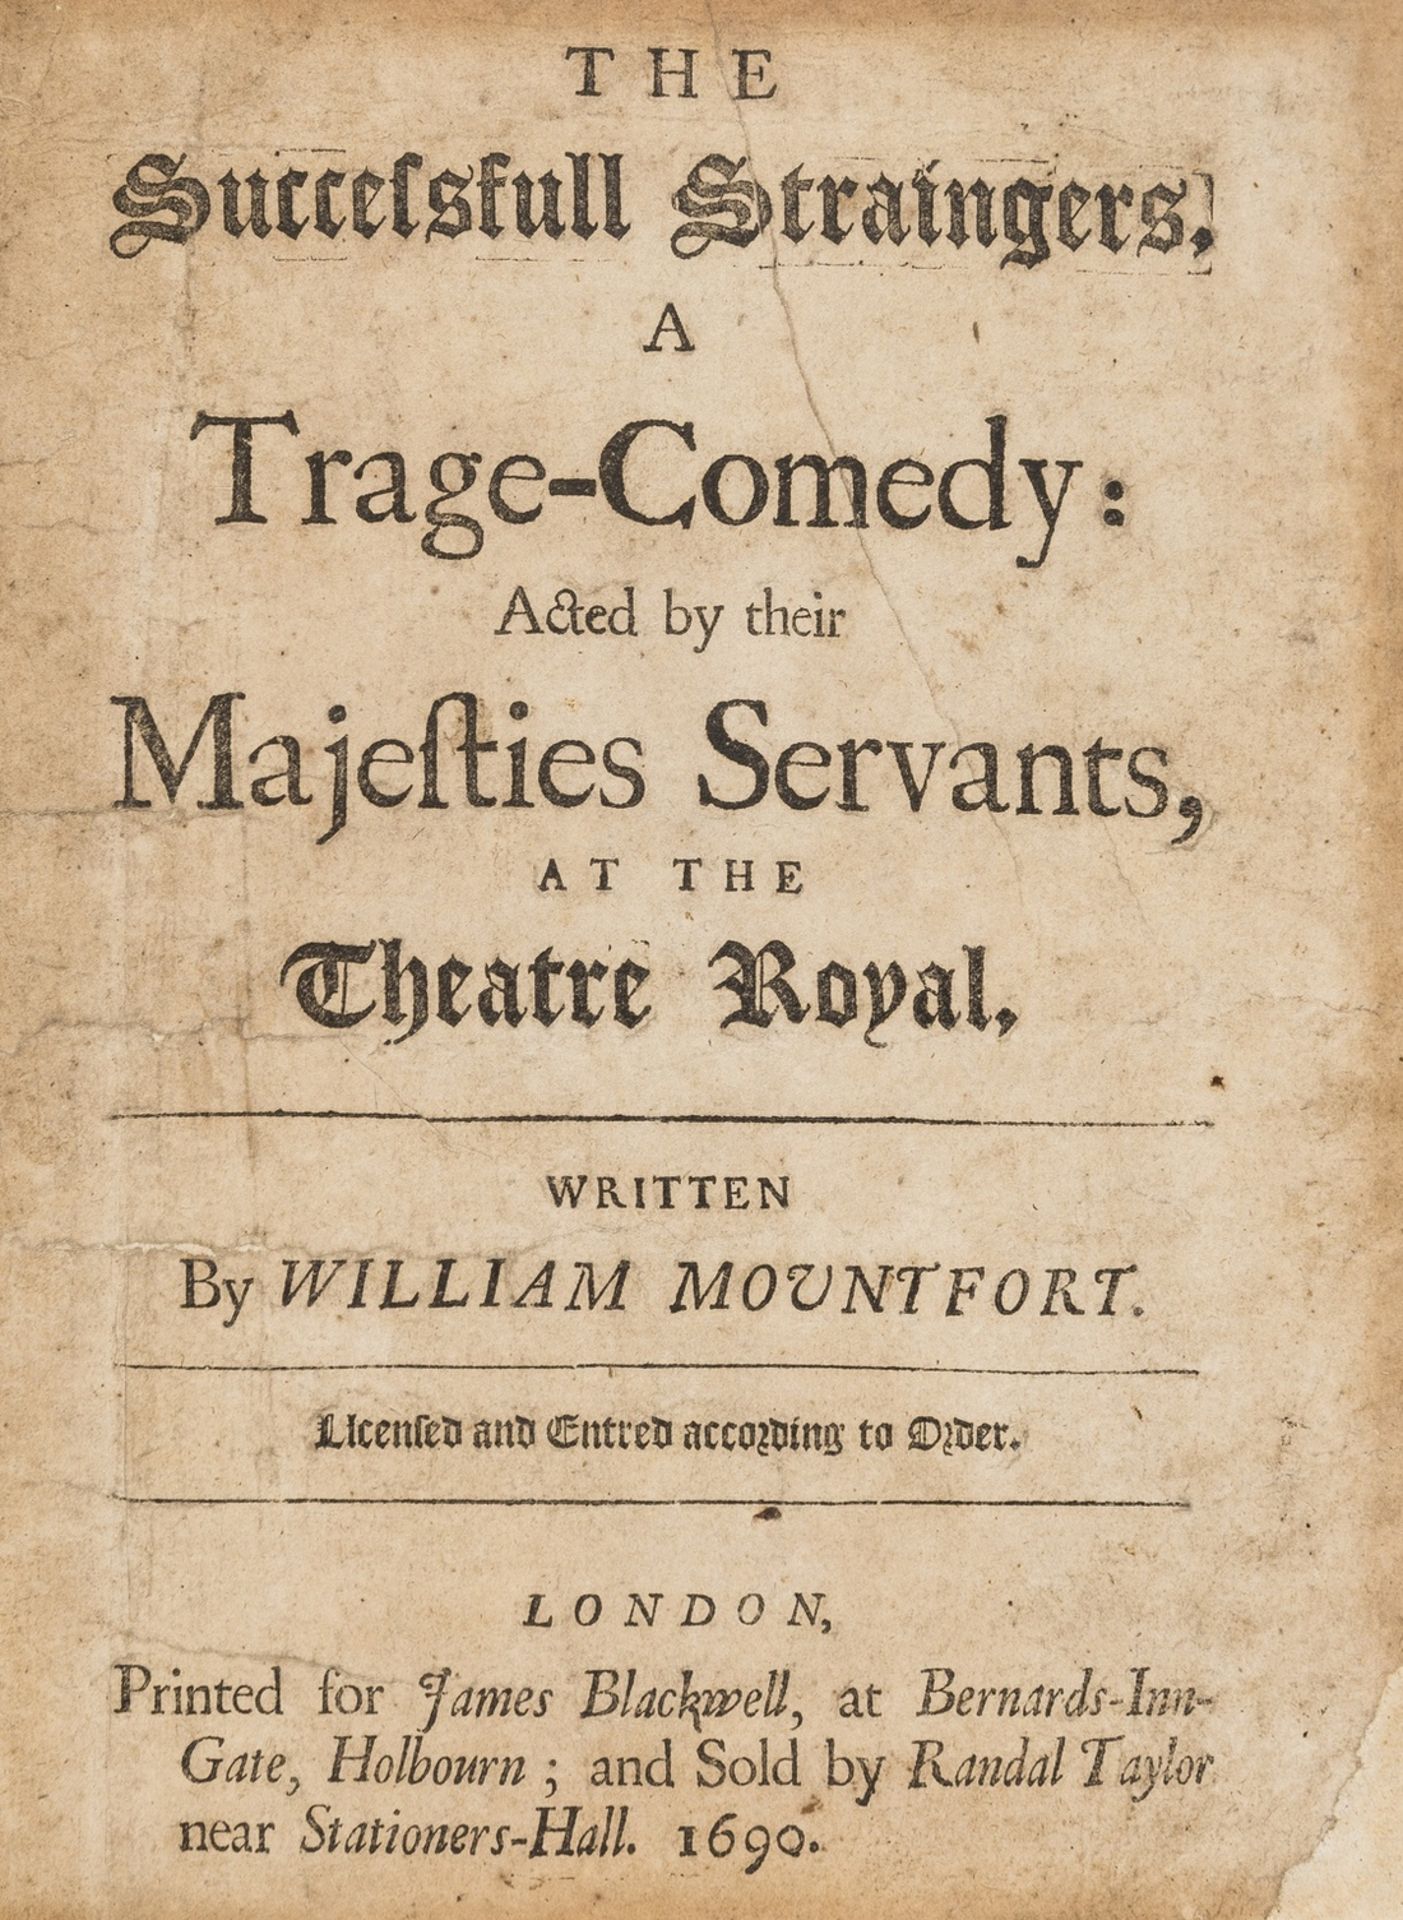 Mountfort (William) The Successfull Straingers. A Trage-Comedy. Acted by their Majesties' …